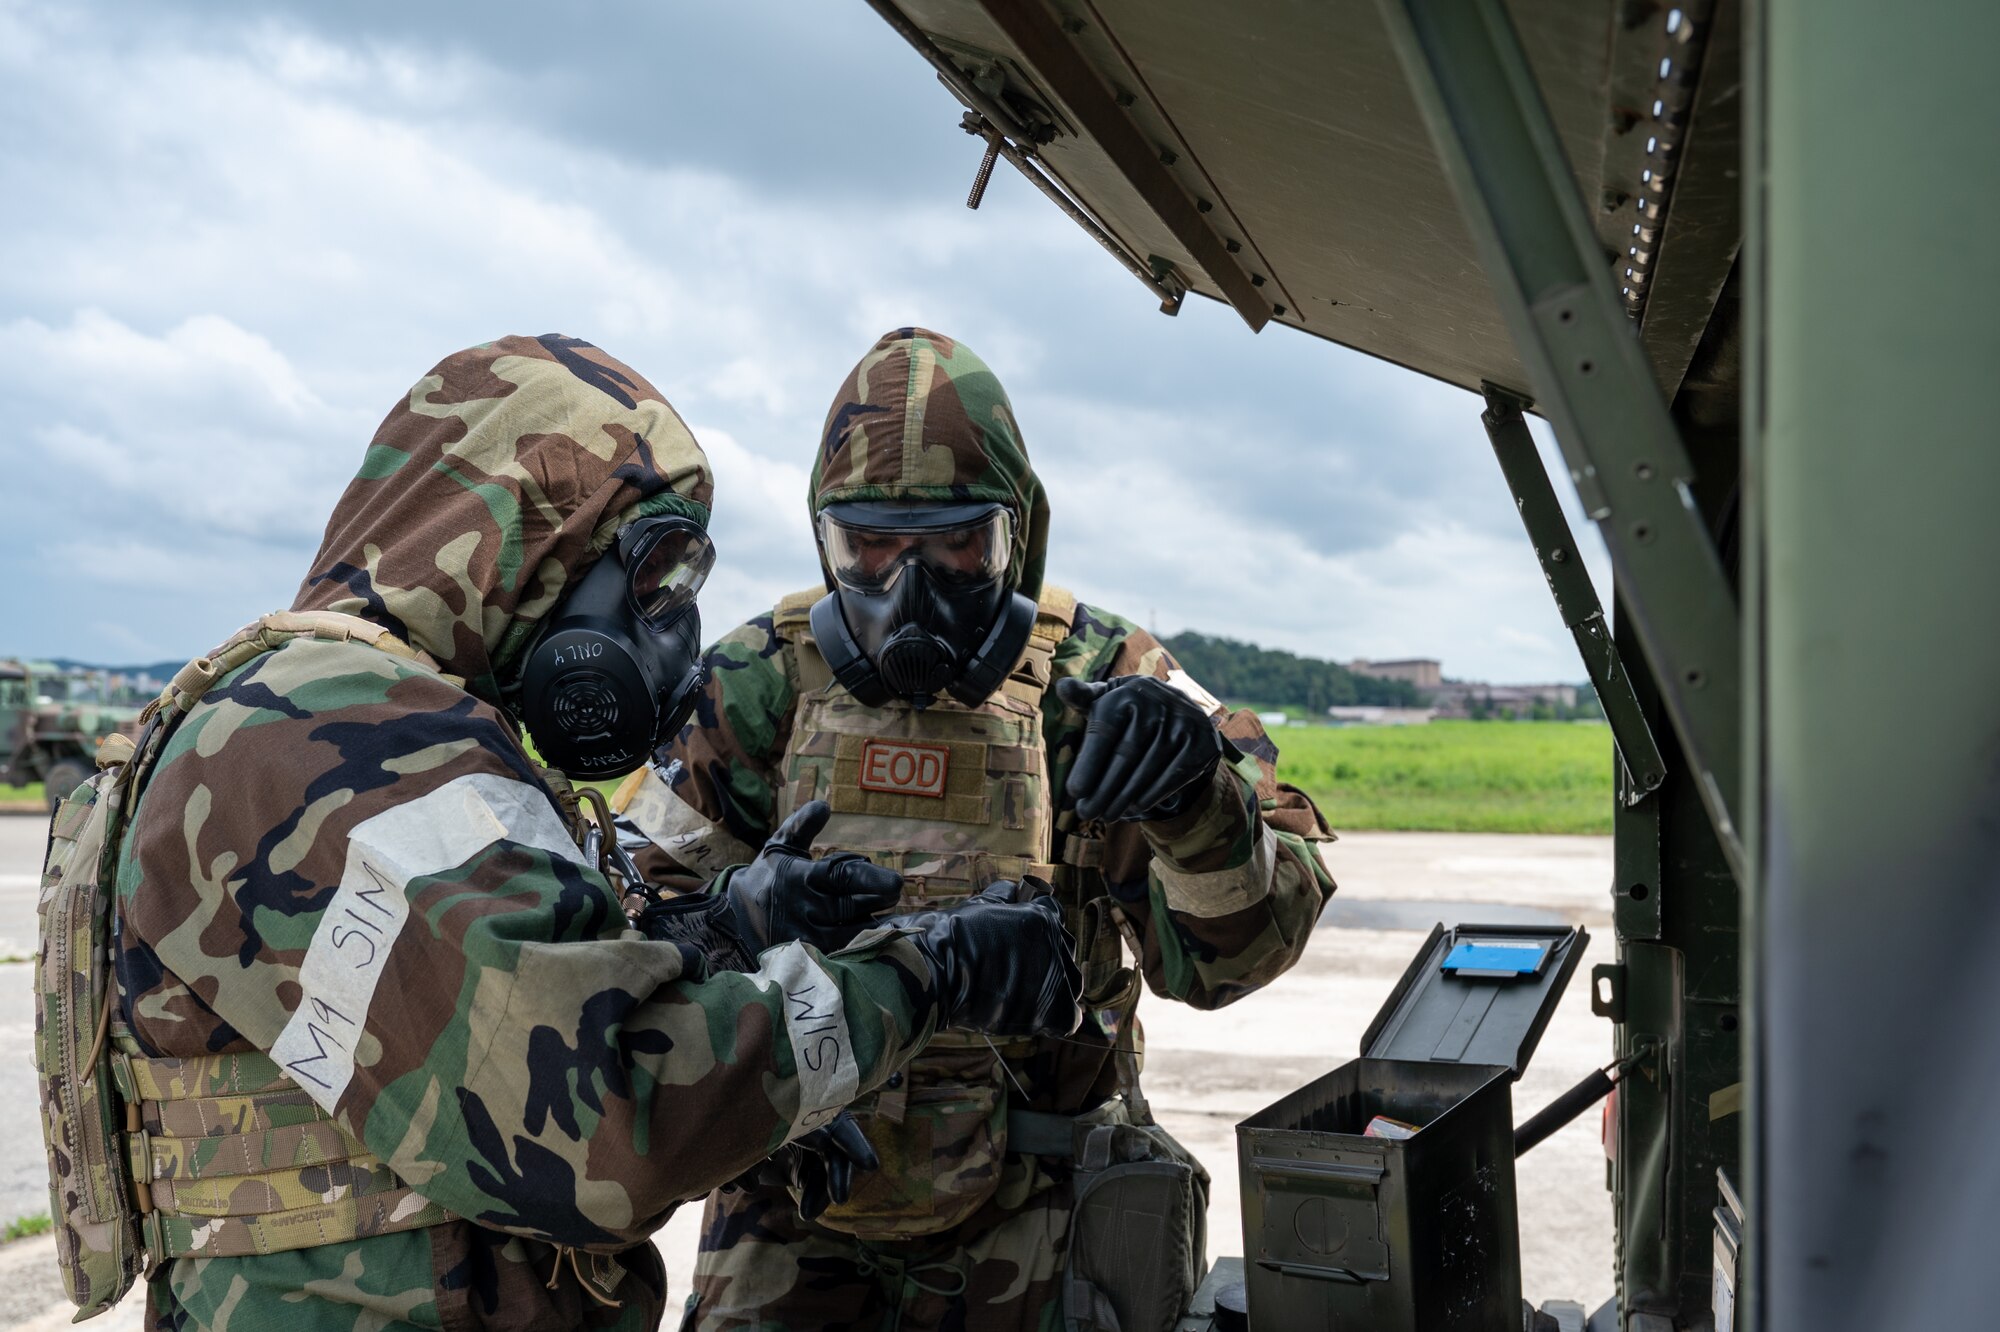 U.S. Air Force Tech. Sgt. Kyle Gooderham and Senior Airman Eric Gaussman, 51st Civil Engineer Squadron explosive ordnance disposal team, respond to an unexploded ordinance call during a combined forces chemical, biological, radiological and nuclear training at Osan Air Base, Republic of Korea, Aug. 24, 2023.